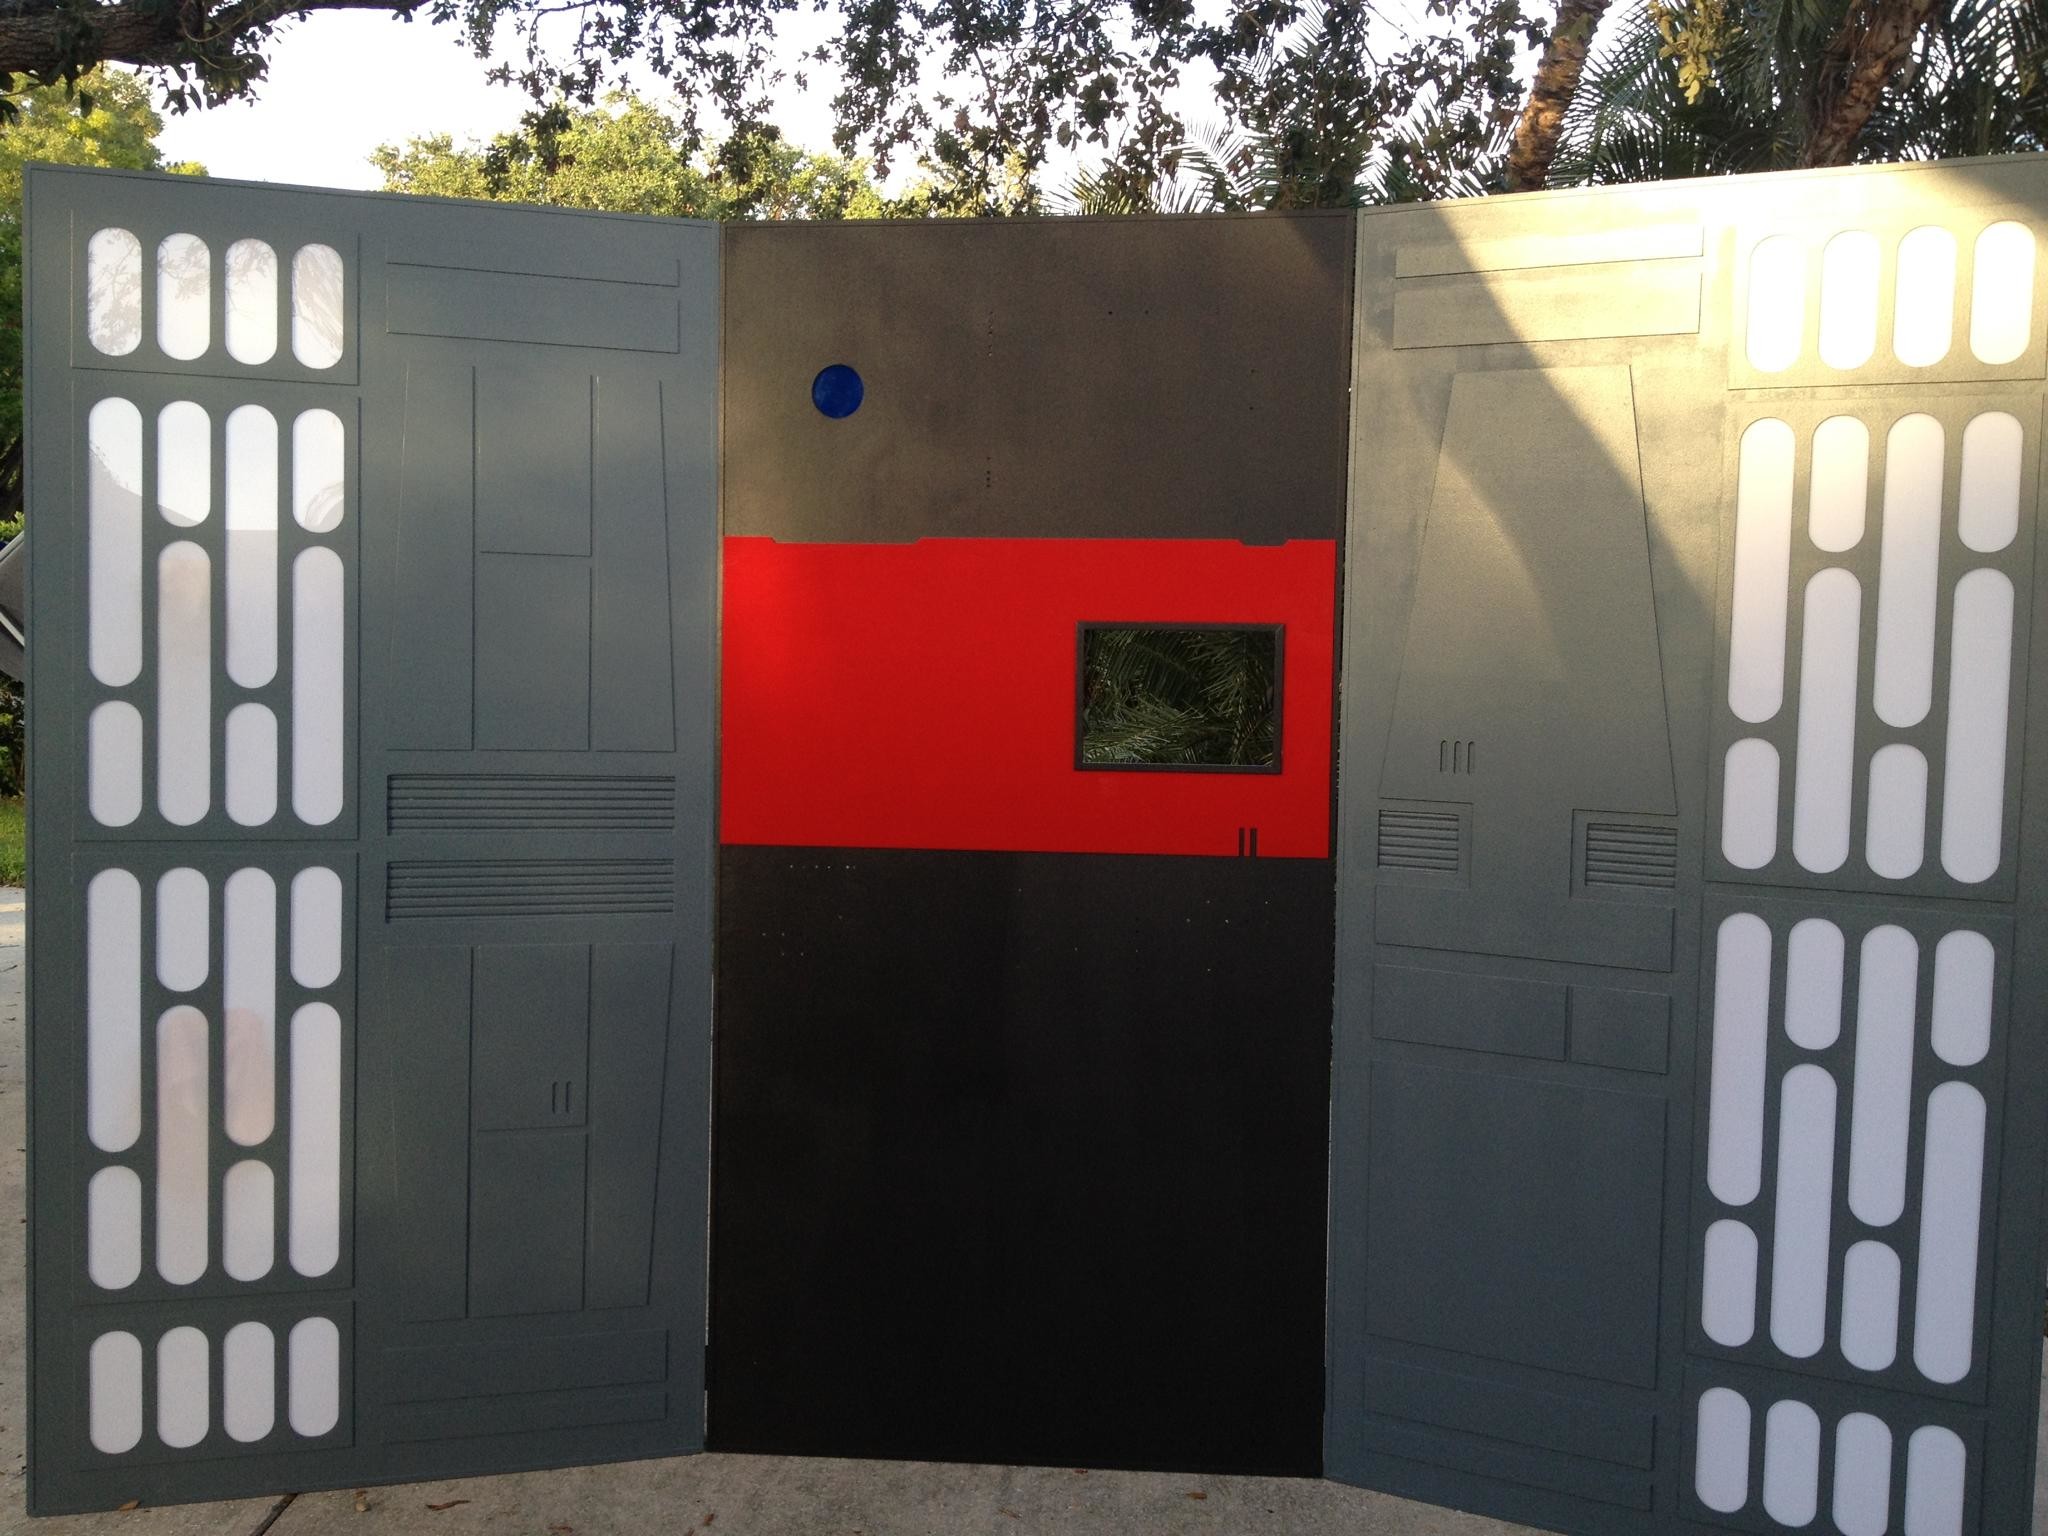 2048x1536 Death Star wall panelling questions